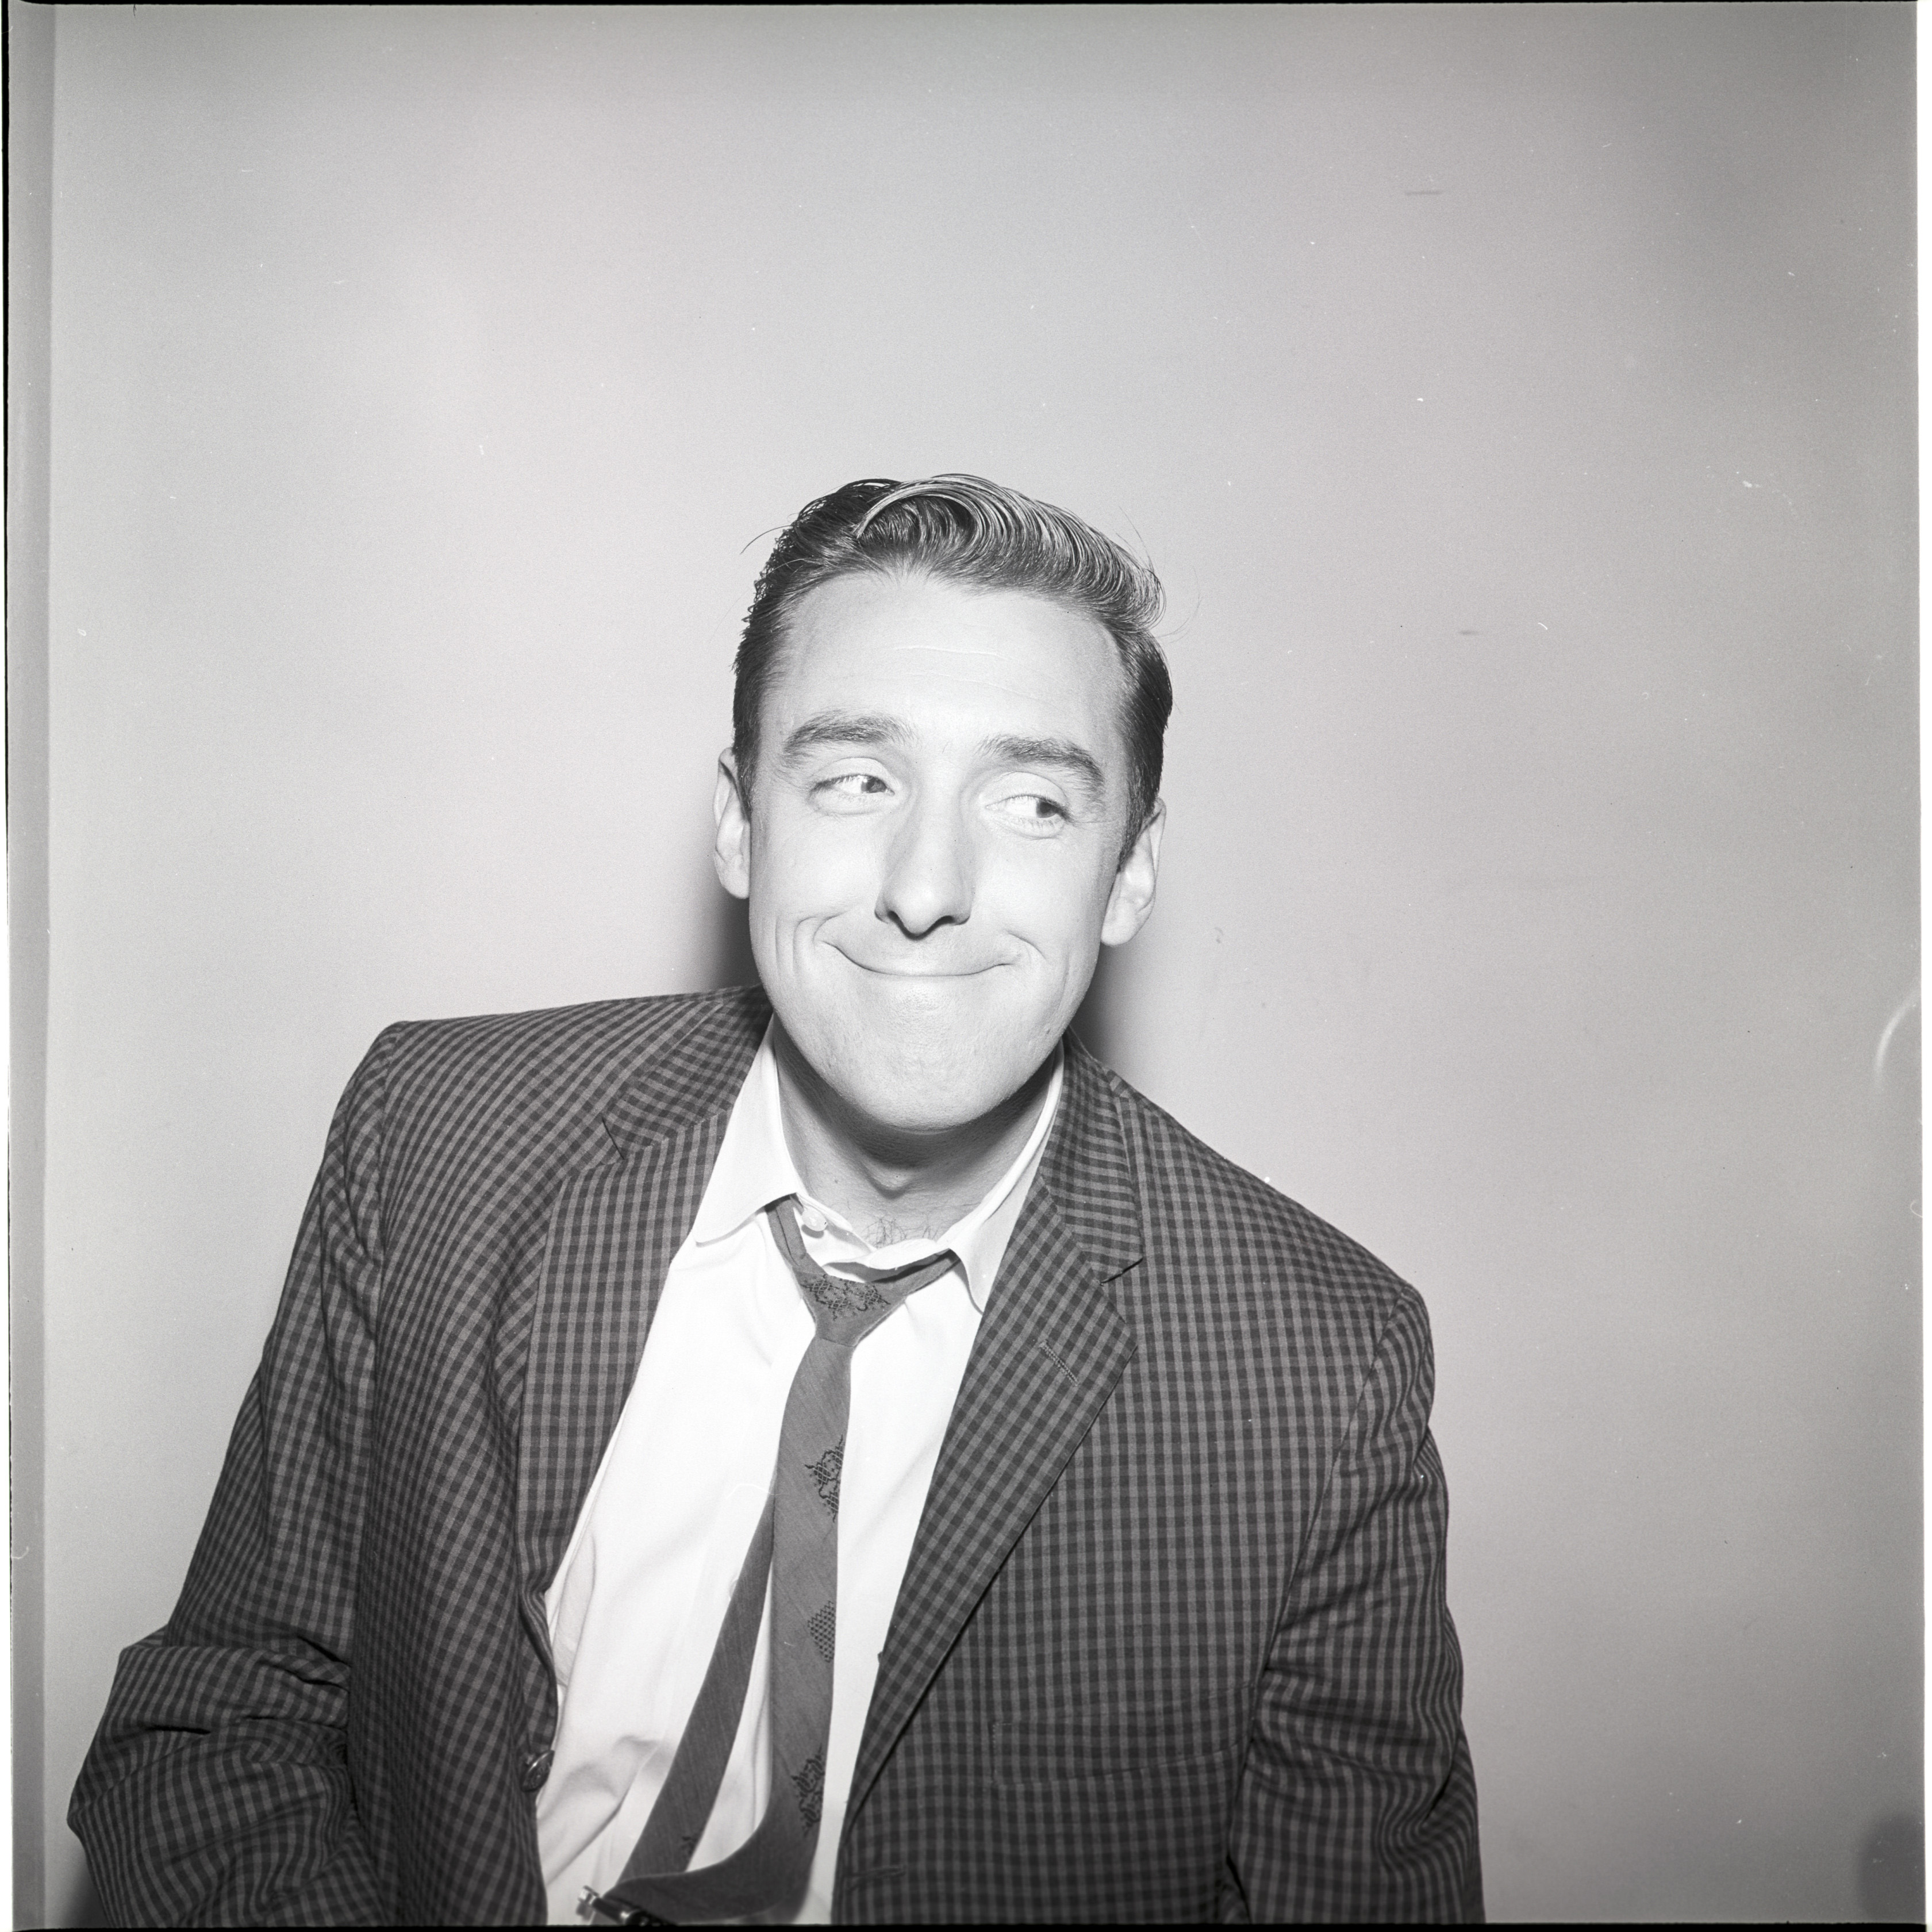 Jim Nabors pictured on "The New Steve Allen Show" on November 1, 1961. | Source: Getty Images